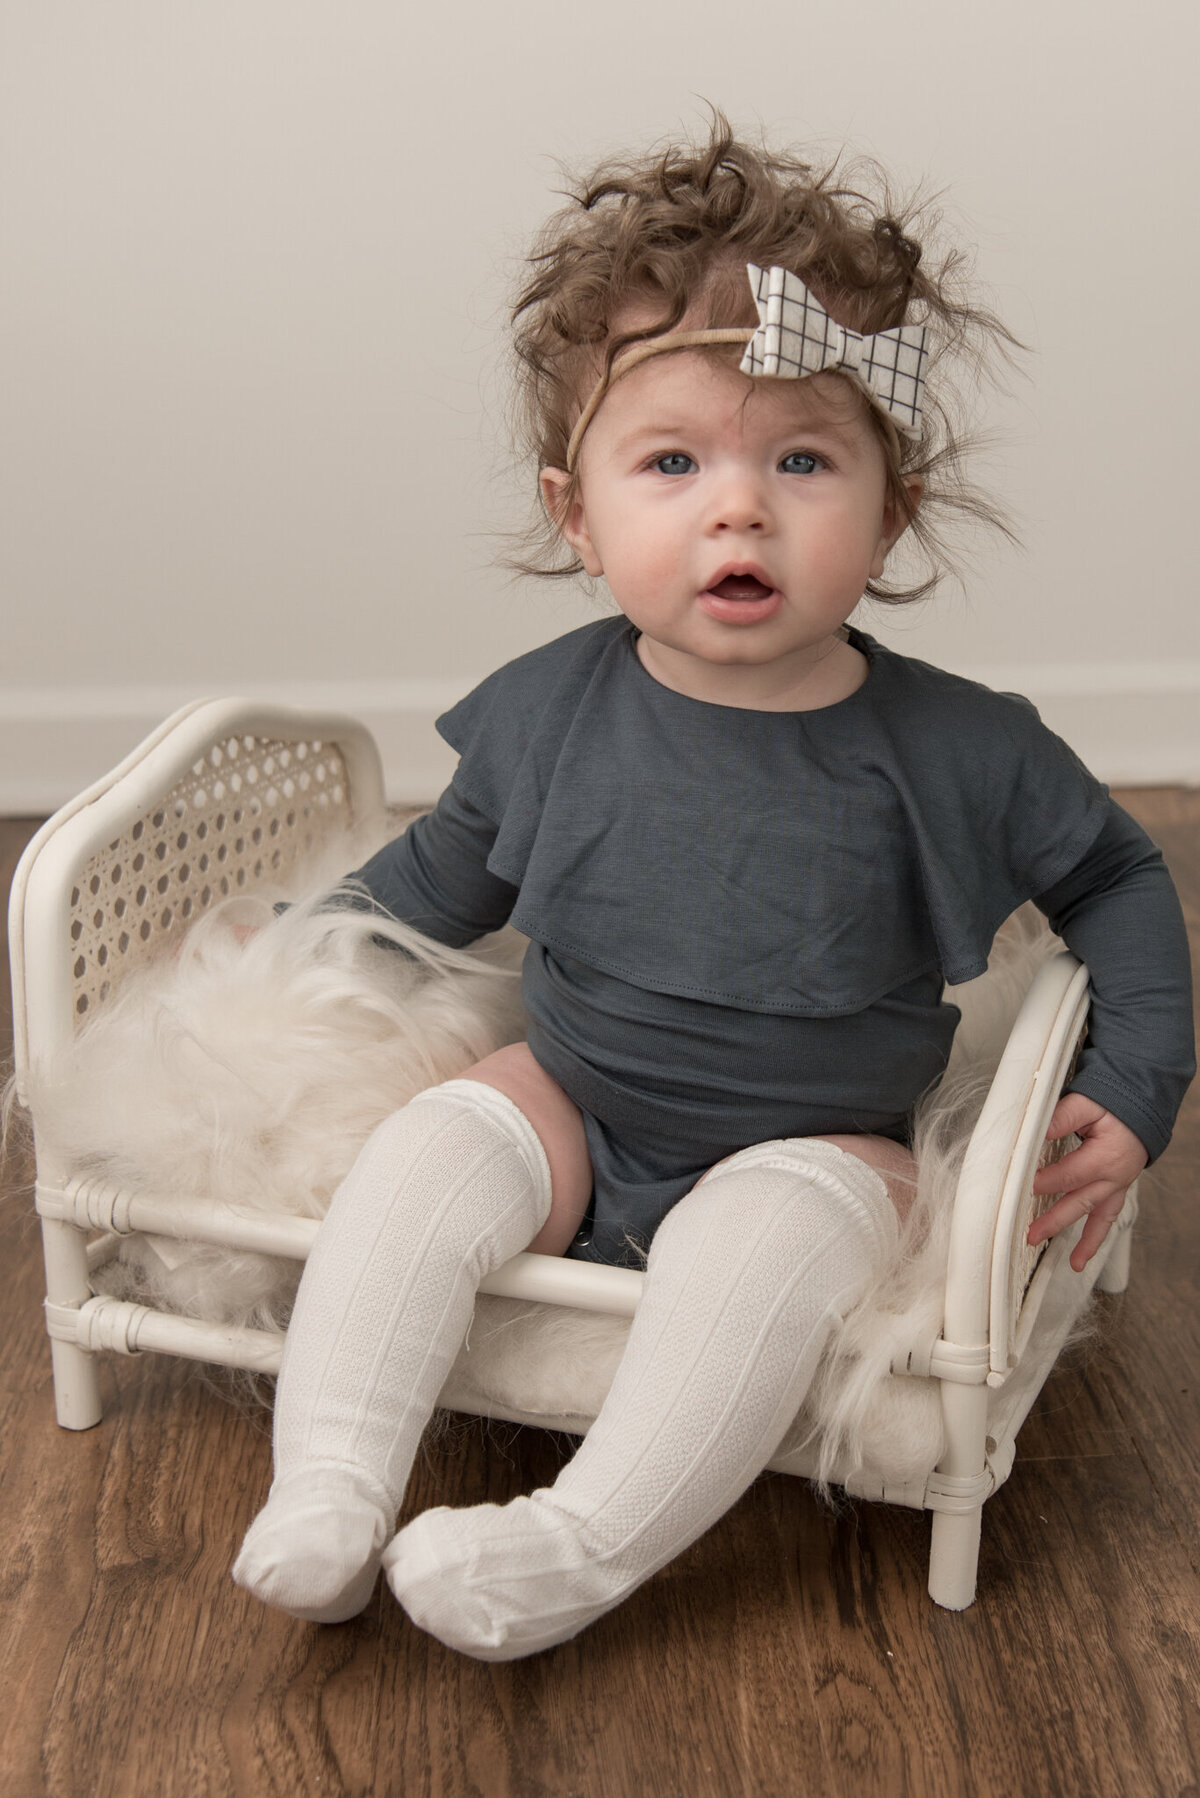 Six month old girl sitting on white bed with white headband and gray romper